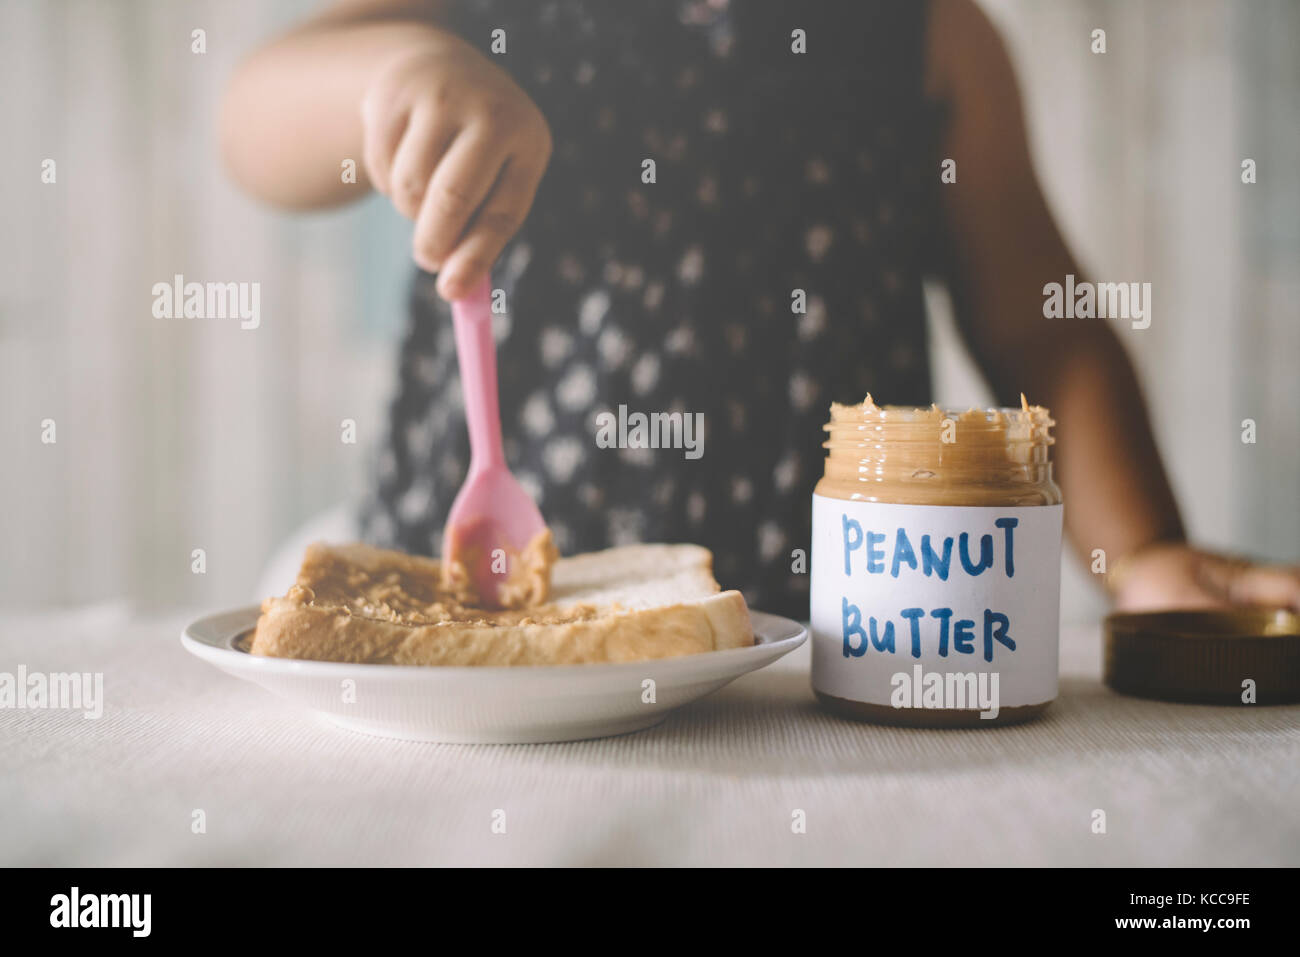 Asian Baby girl playing / spreading peanut butter on a bread. Baby making a mess with peanut butter Stock Photo